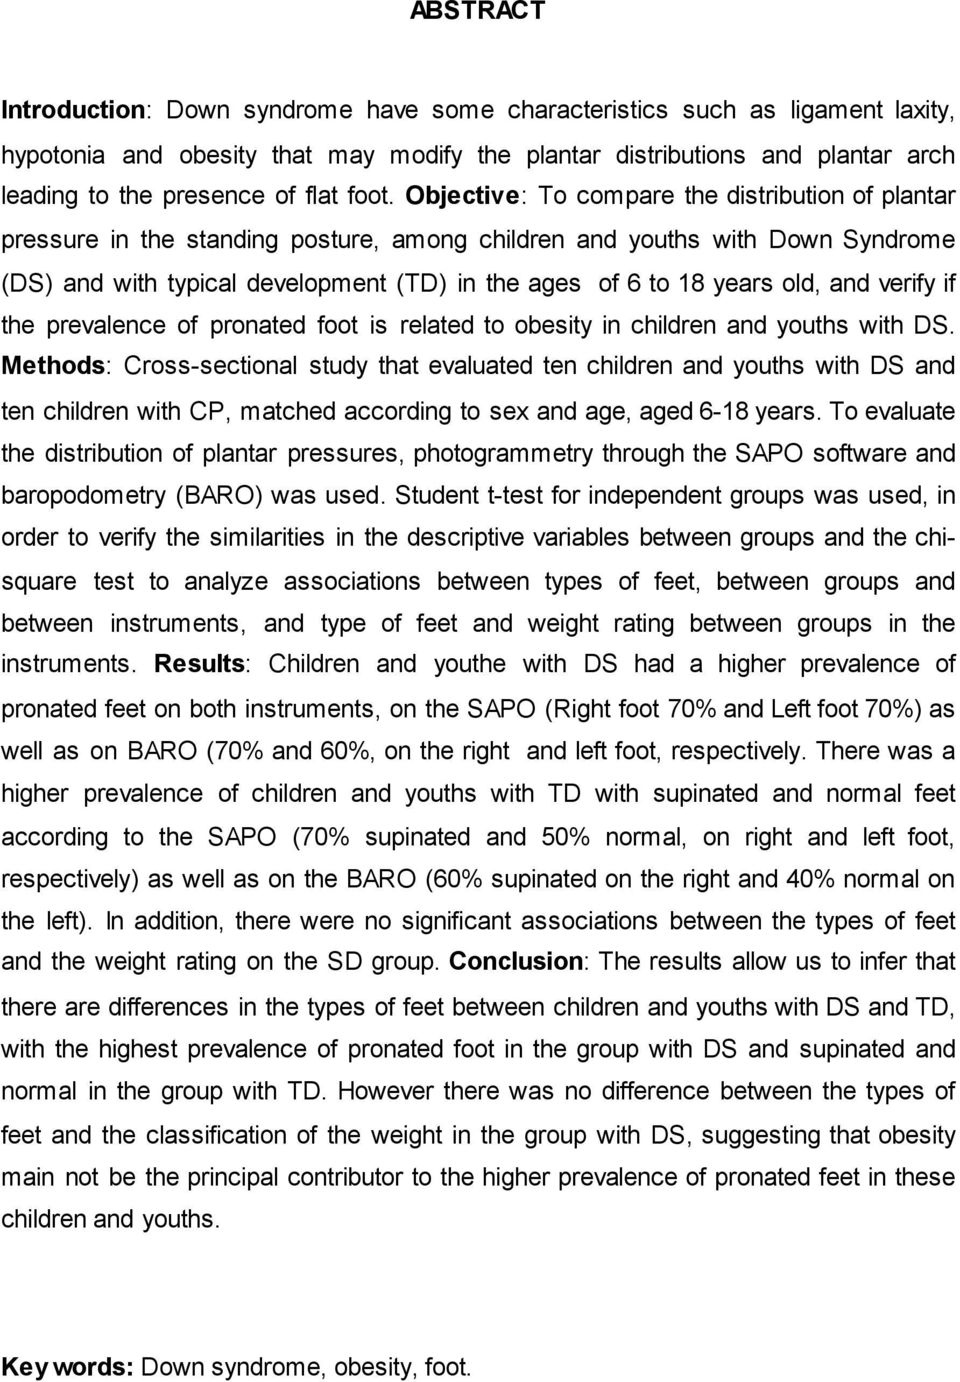 Objective: To compare the distribution of plantar pressure in the standing posture, among children and youths with Down Syndrome (DS) and with typical development (TD) in the ages of 6 to 18 years